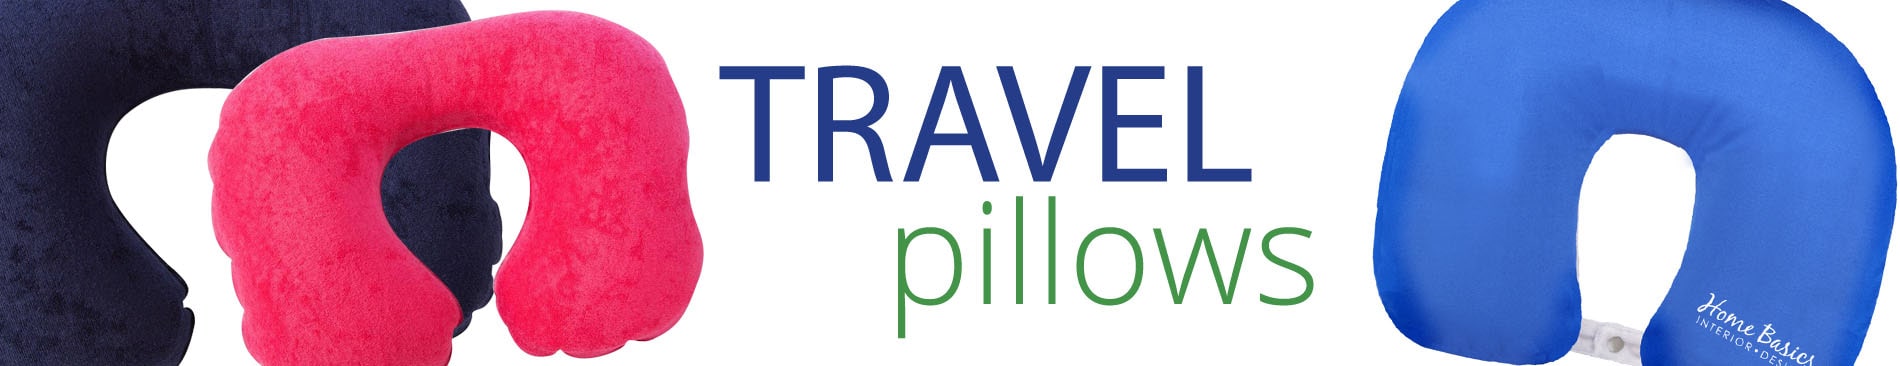 promotional travel pillows